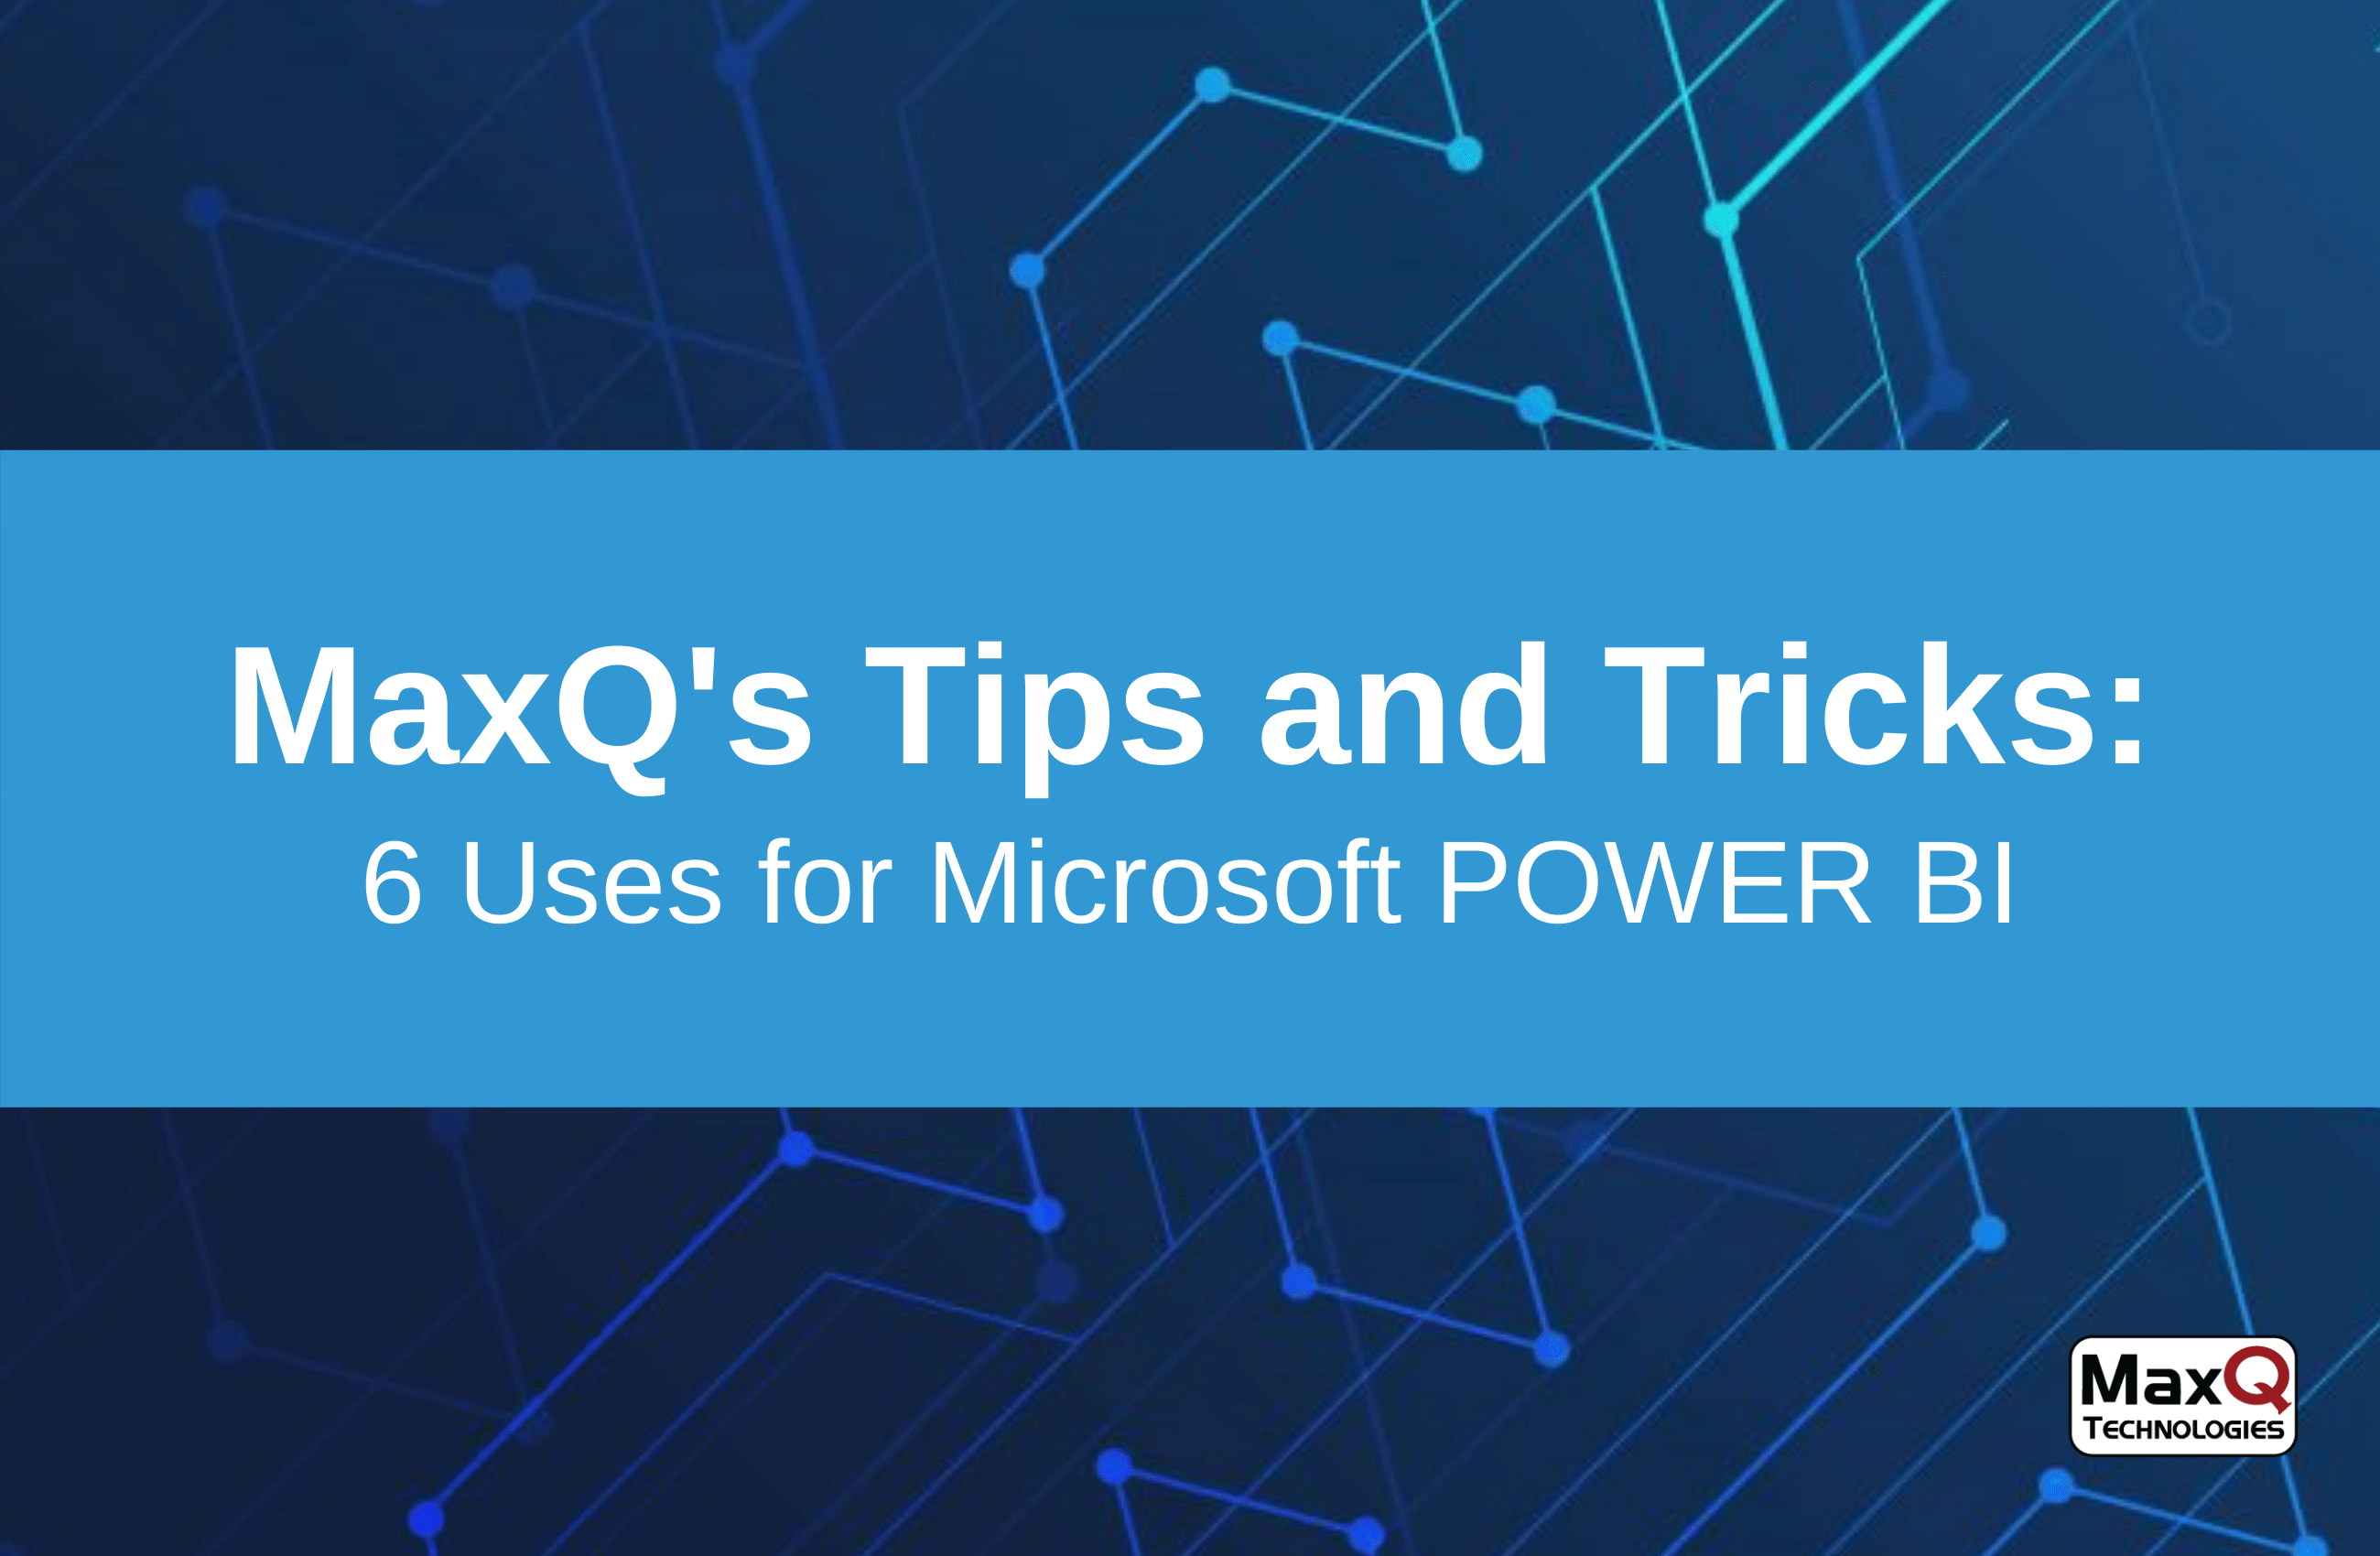 You are currently viewing 6 Uses for Microsoft Power BI